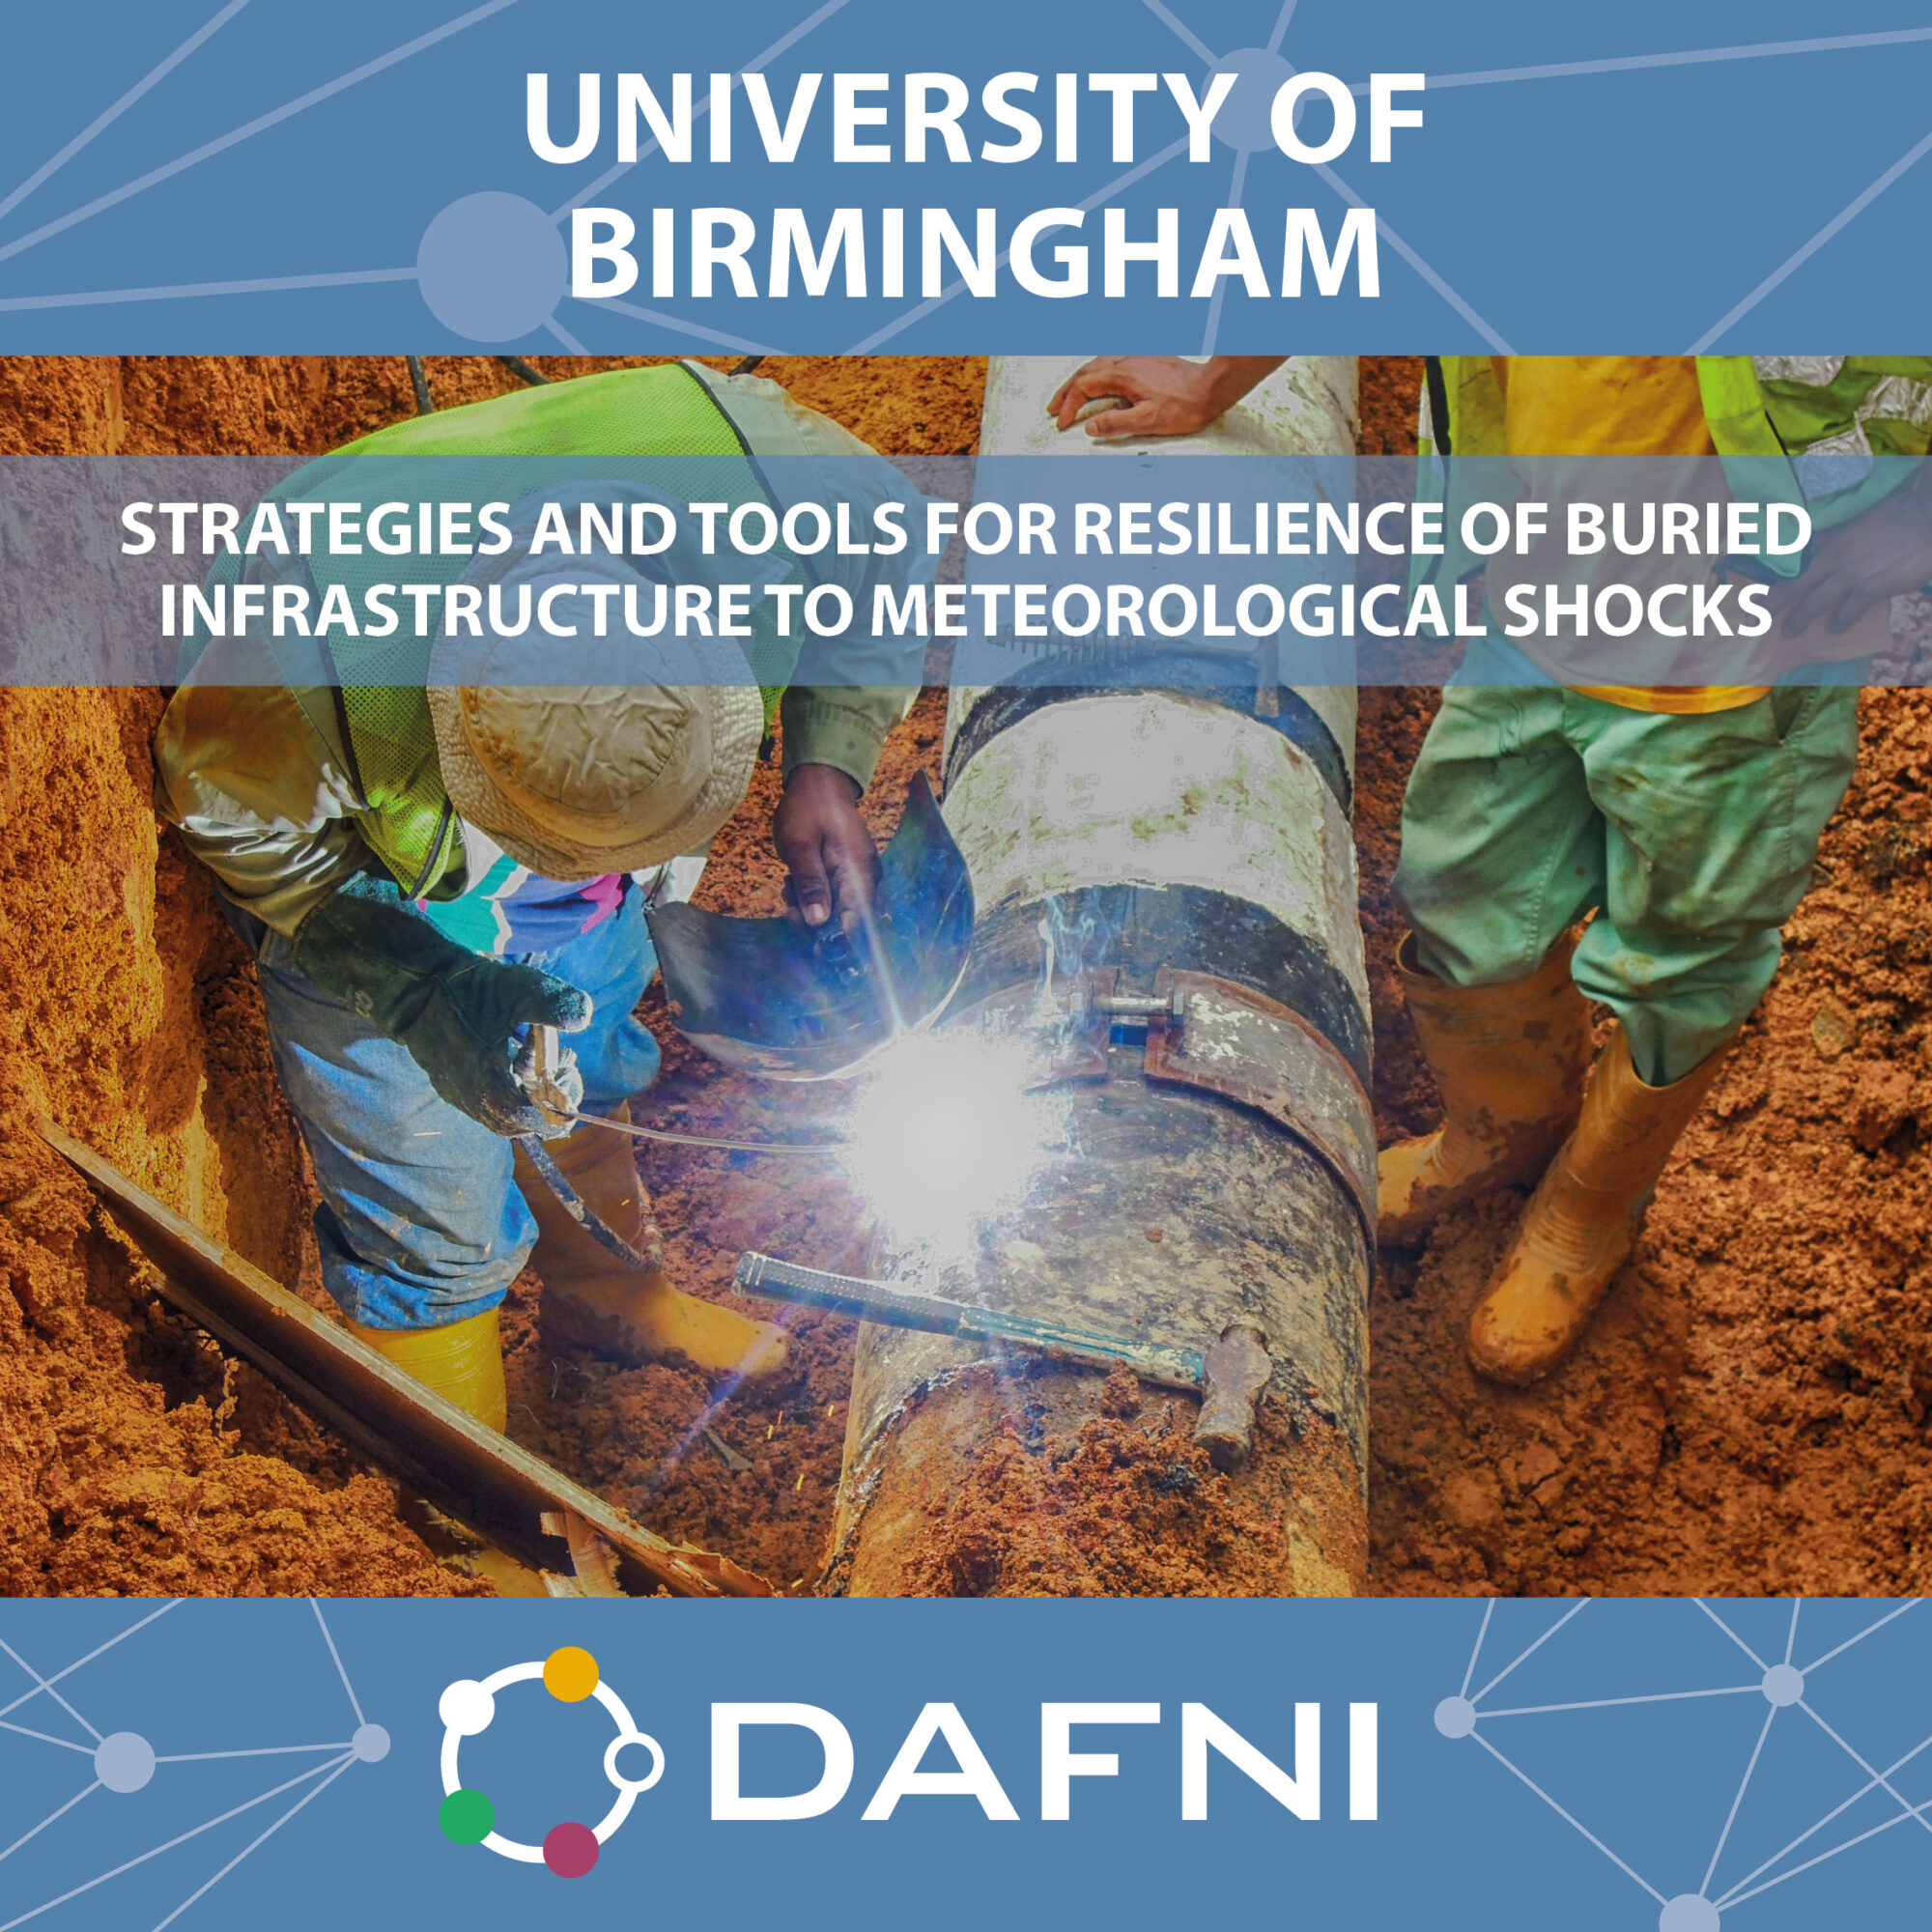 University of Birmingham - Strategies and tools for resilience of buried infrastructure to meteorological shocks